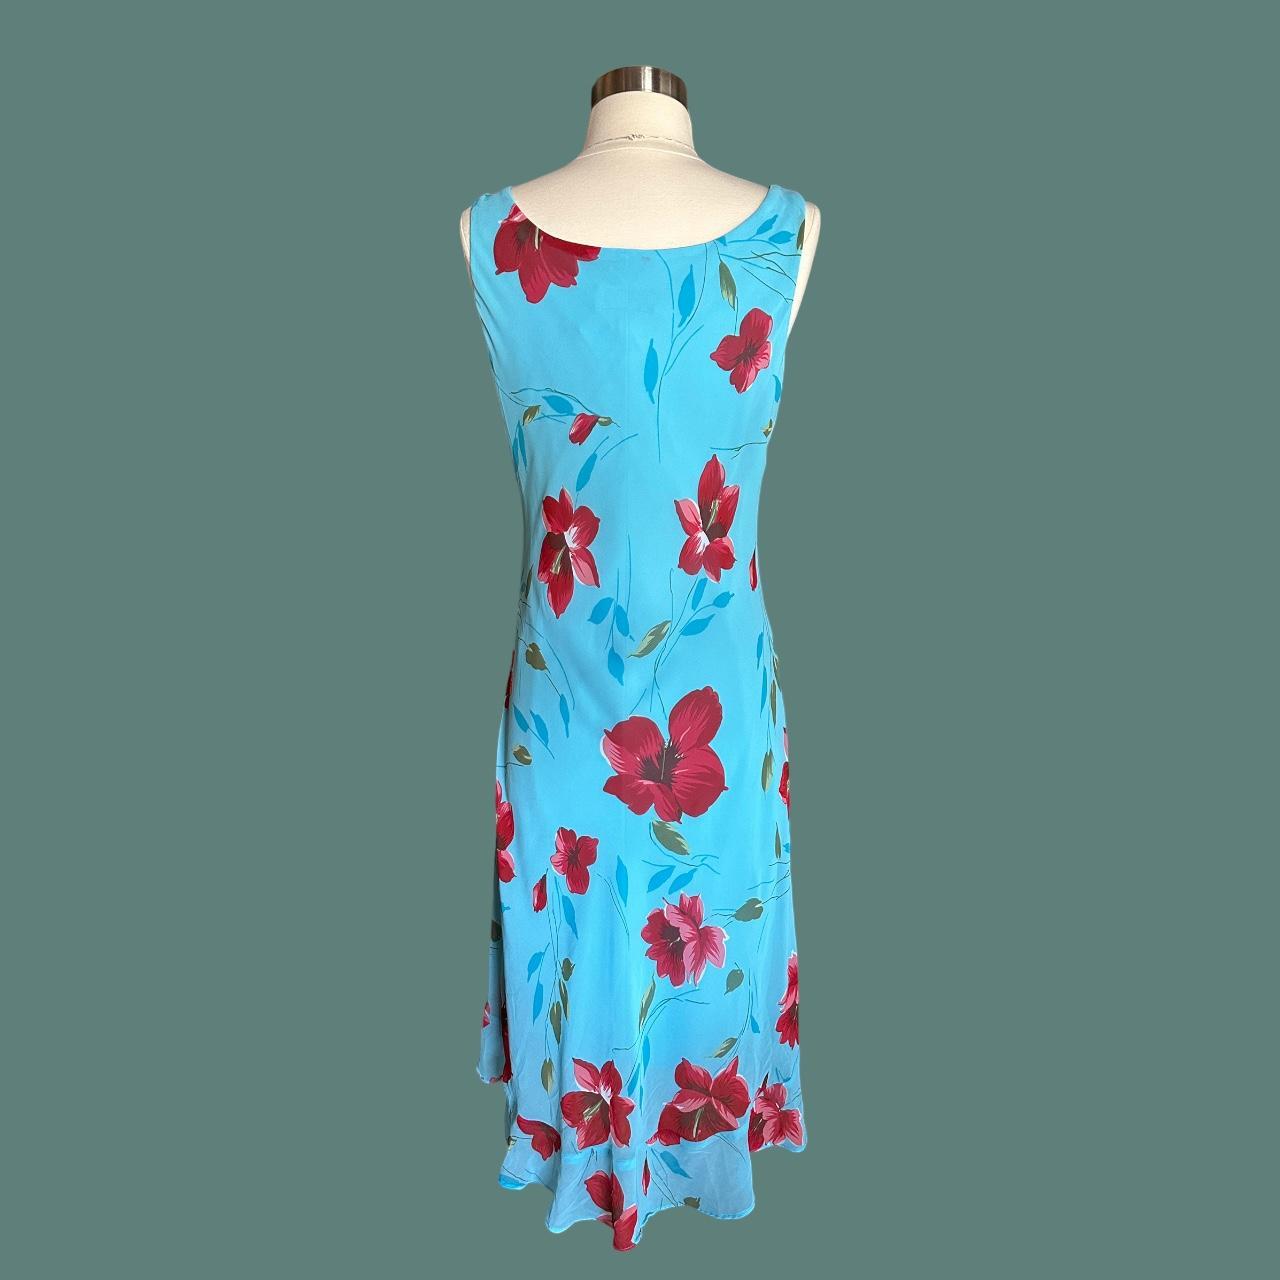 PAIGE Women's Blue and Red Dress (3)